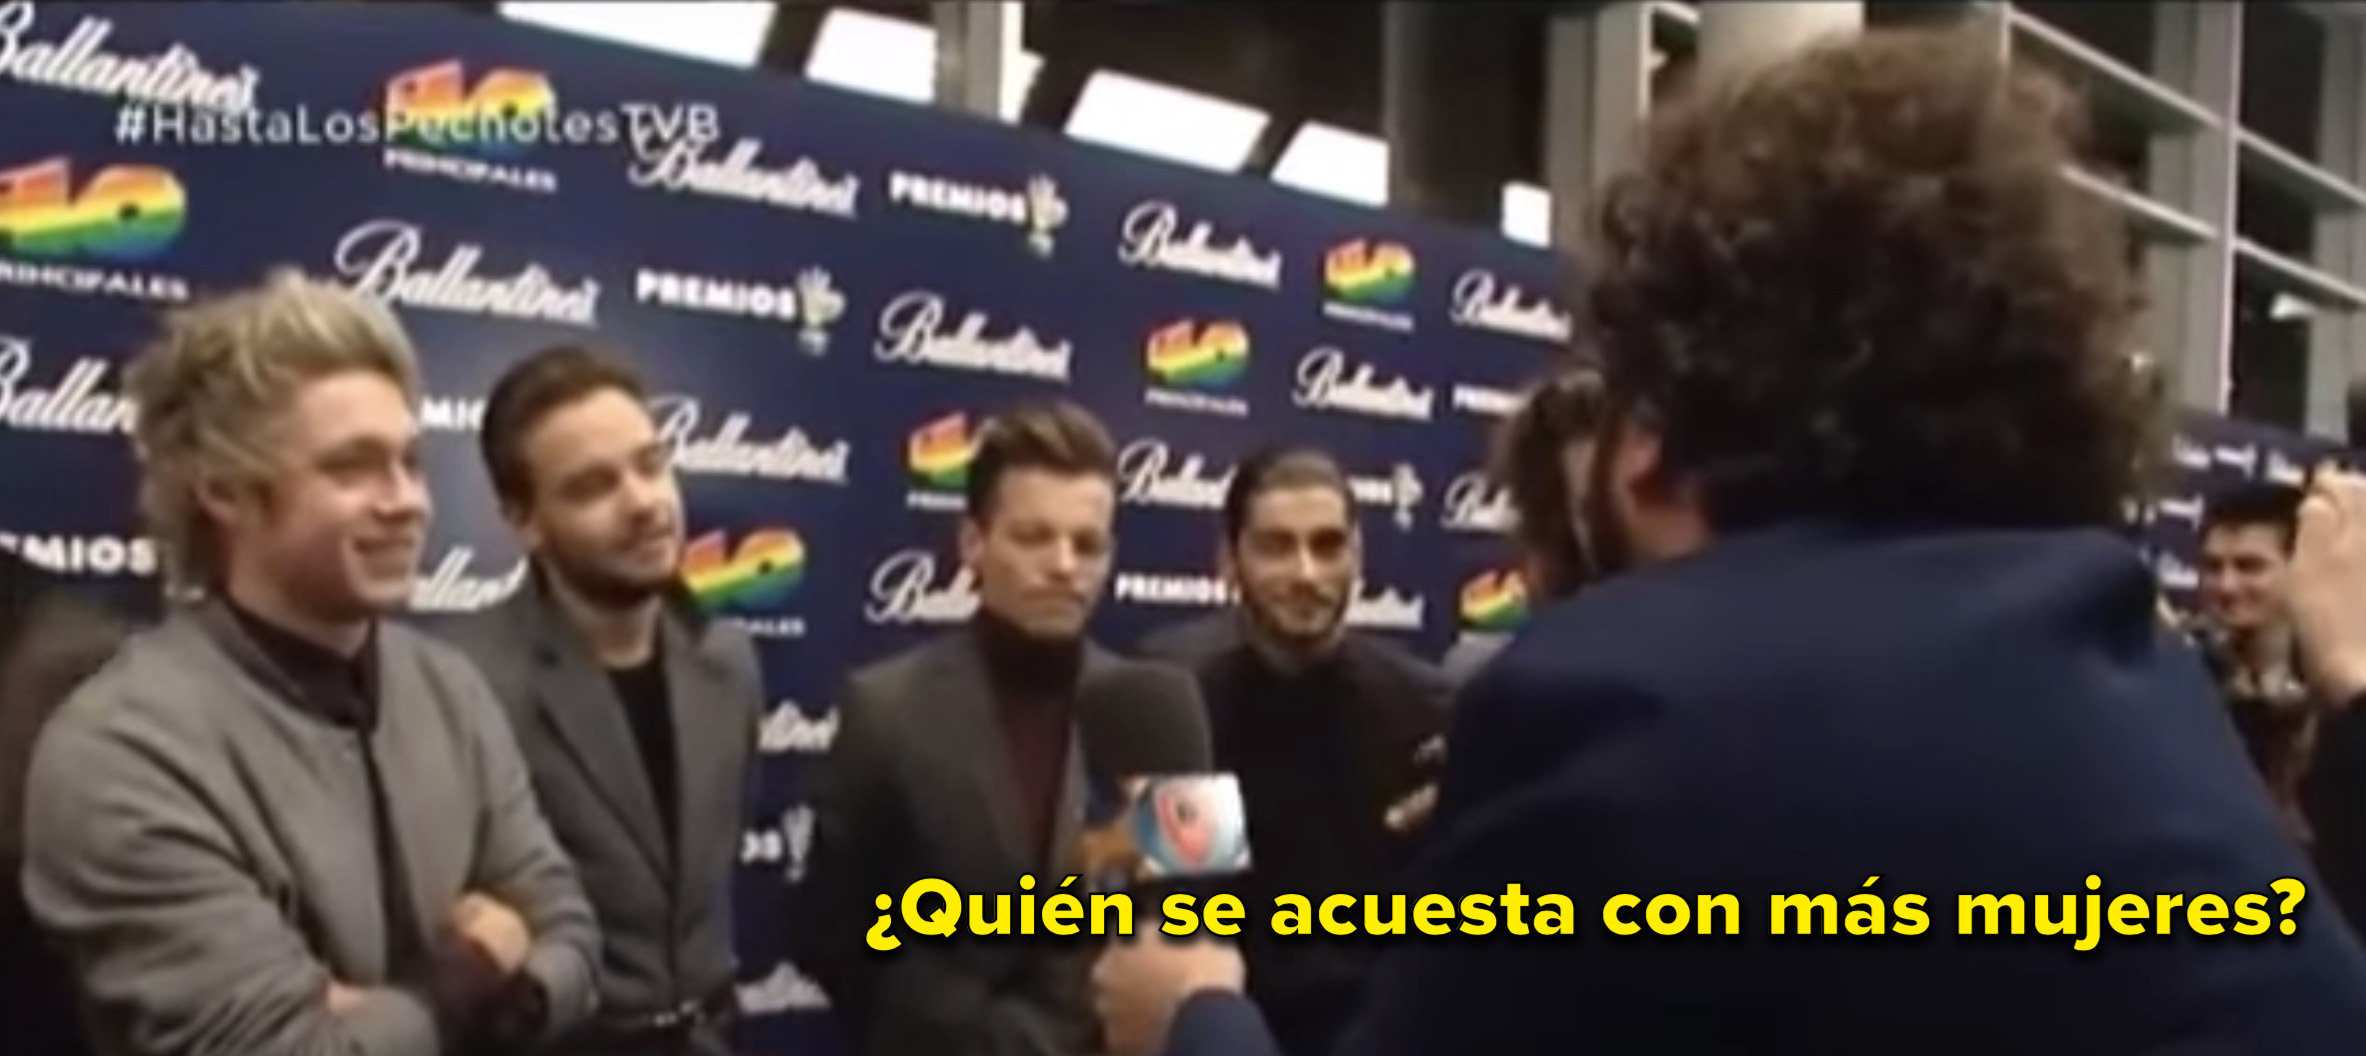 An interviewer asking One Direction, &quot;Who is the main fucker of the band?&quot;